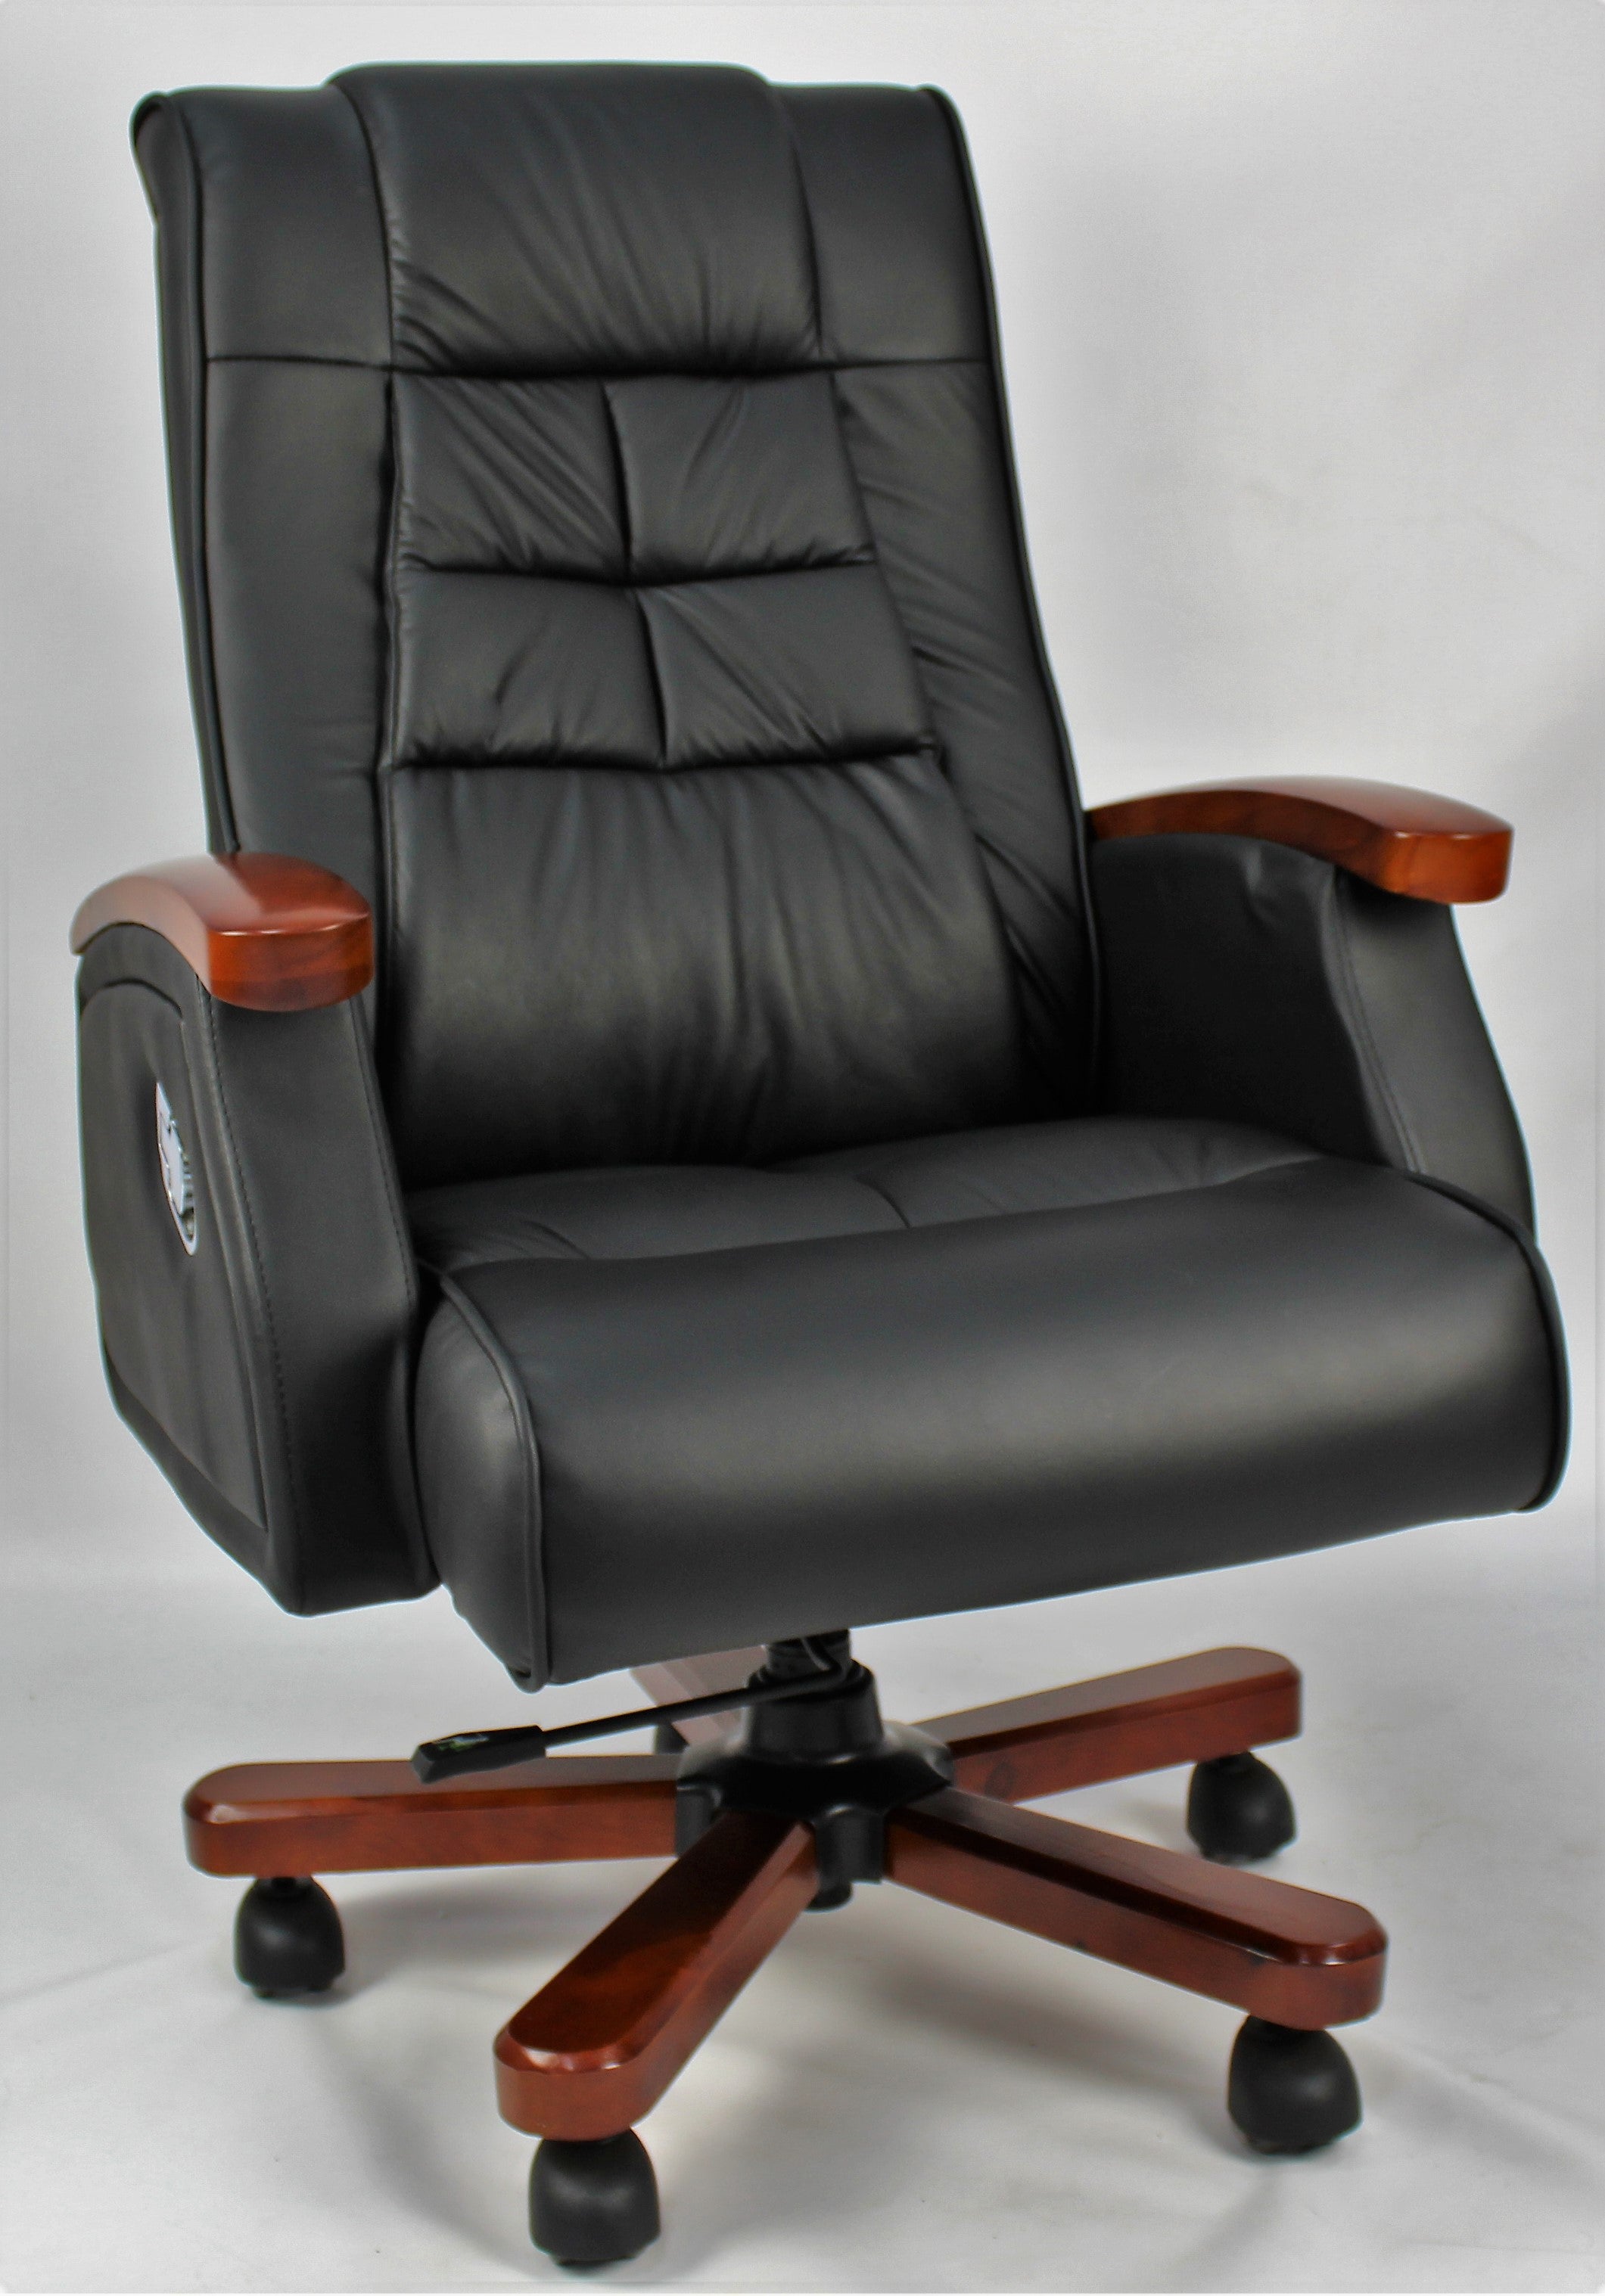 Luxury Black Leather recliner Executive Office Chair CHA-S-976